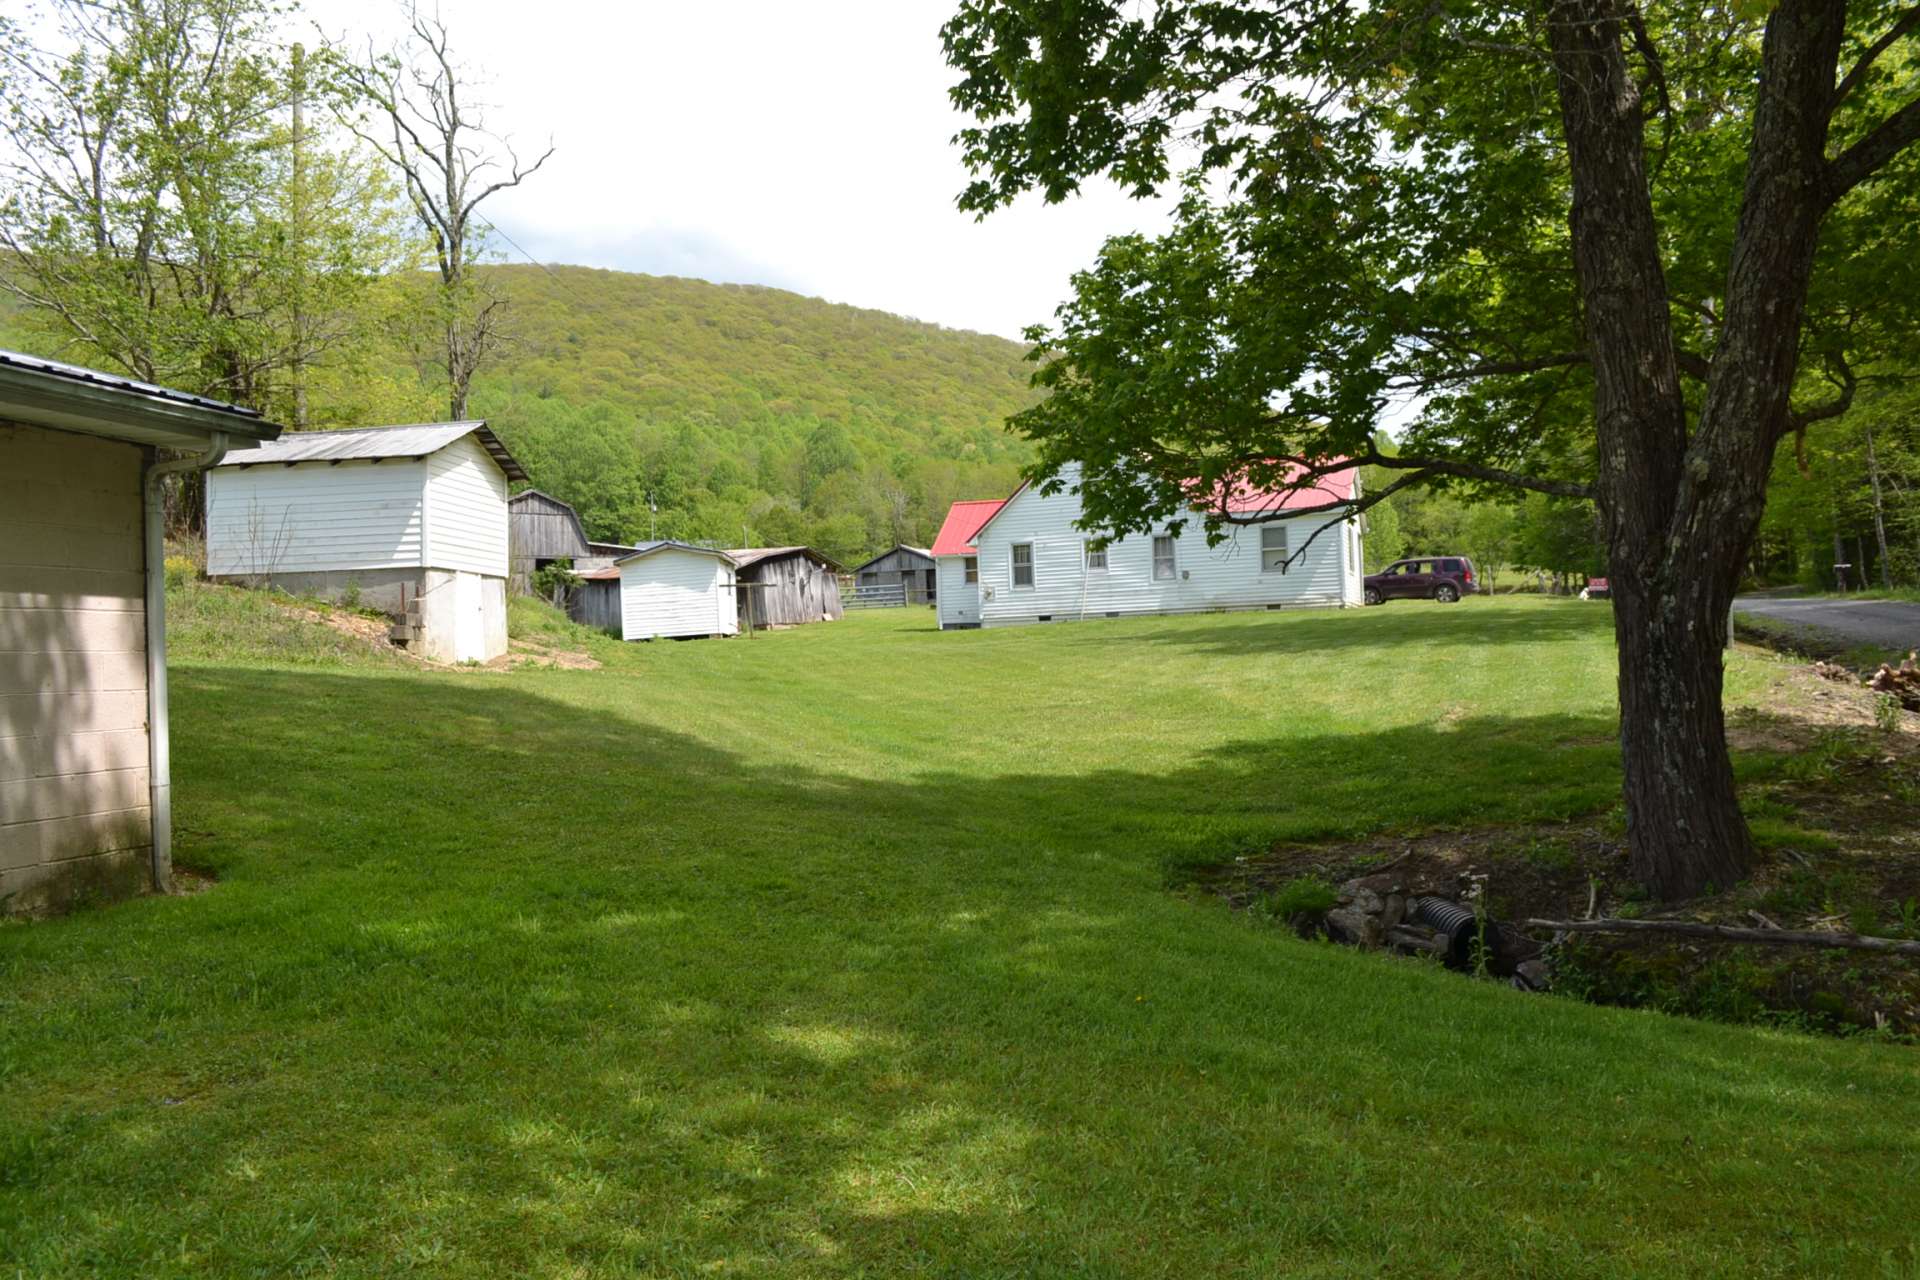 Enjoy country living with this property located on a graveled country road in the Troutdale area of Grayson County close to the Mount Rogers Recreation area, Jefferson National Forest, Grayson Highlands and several trout streams.